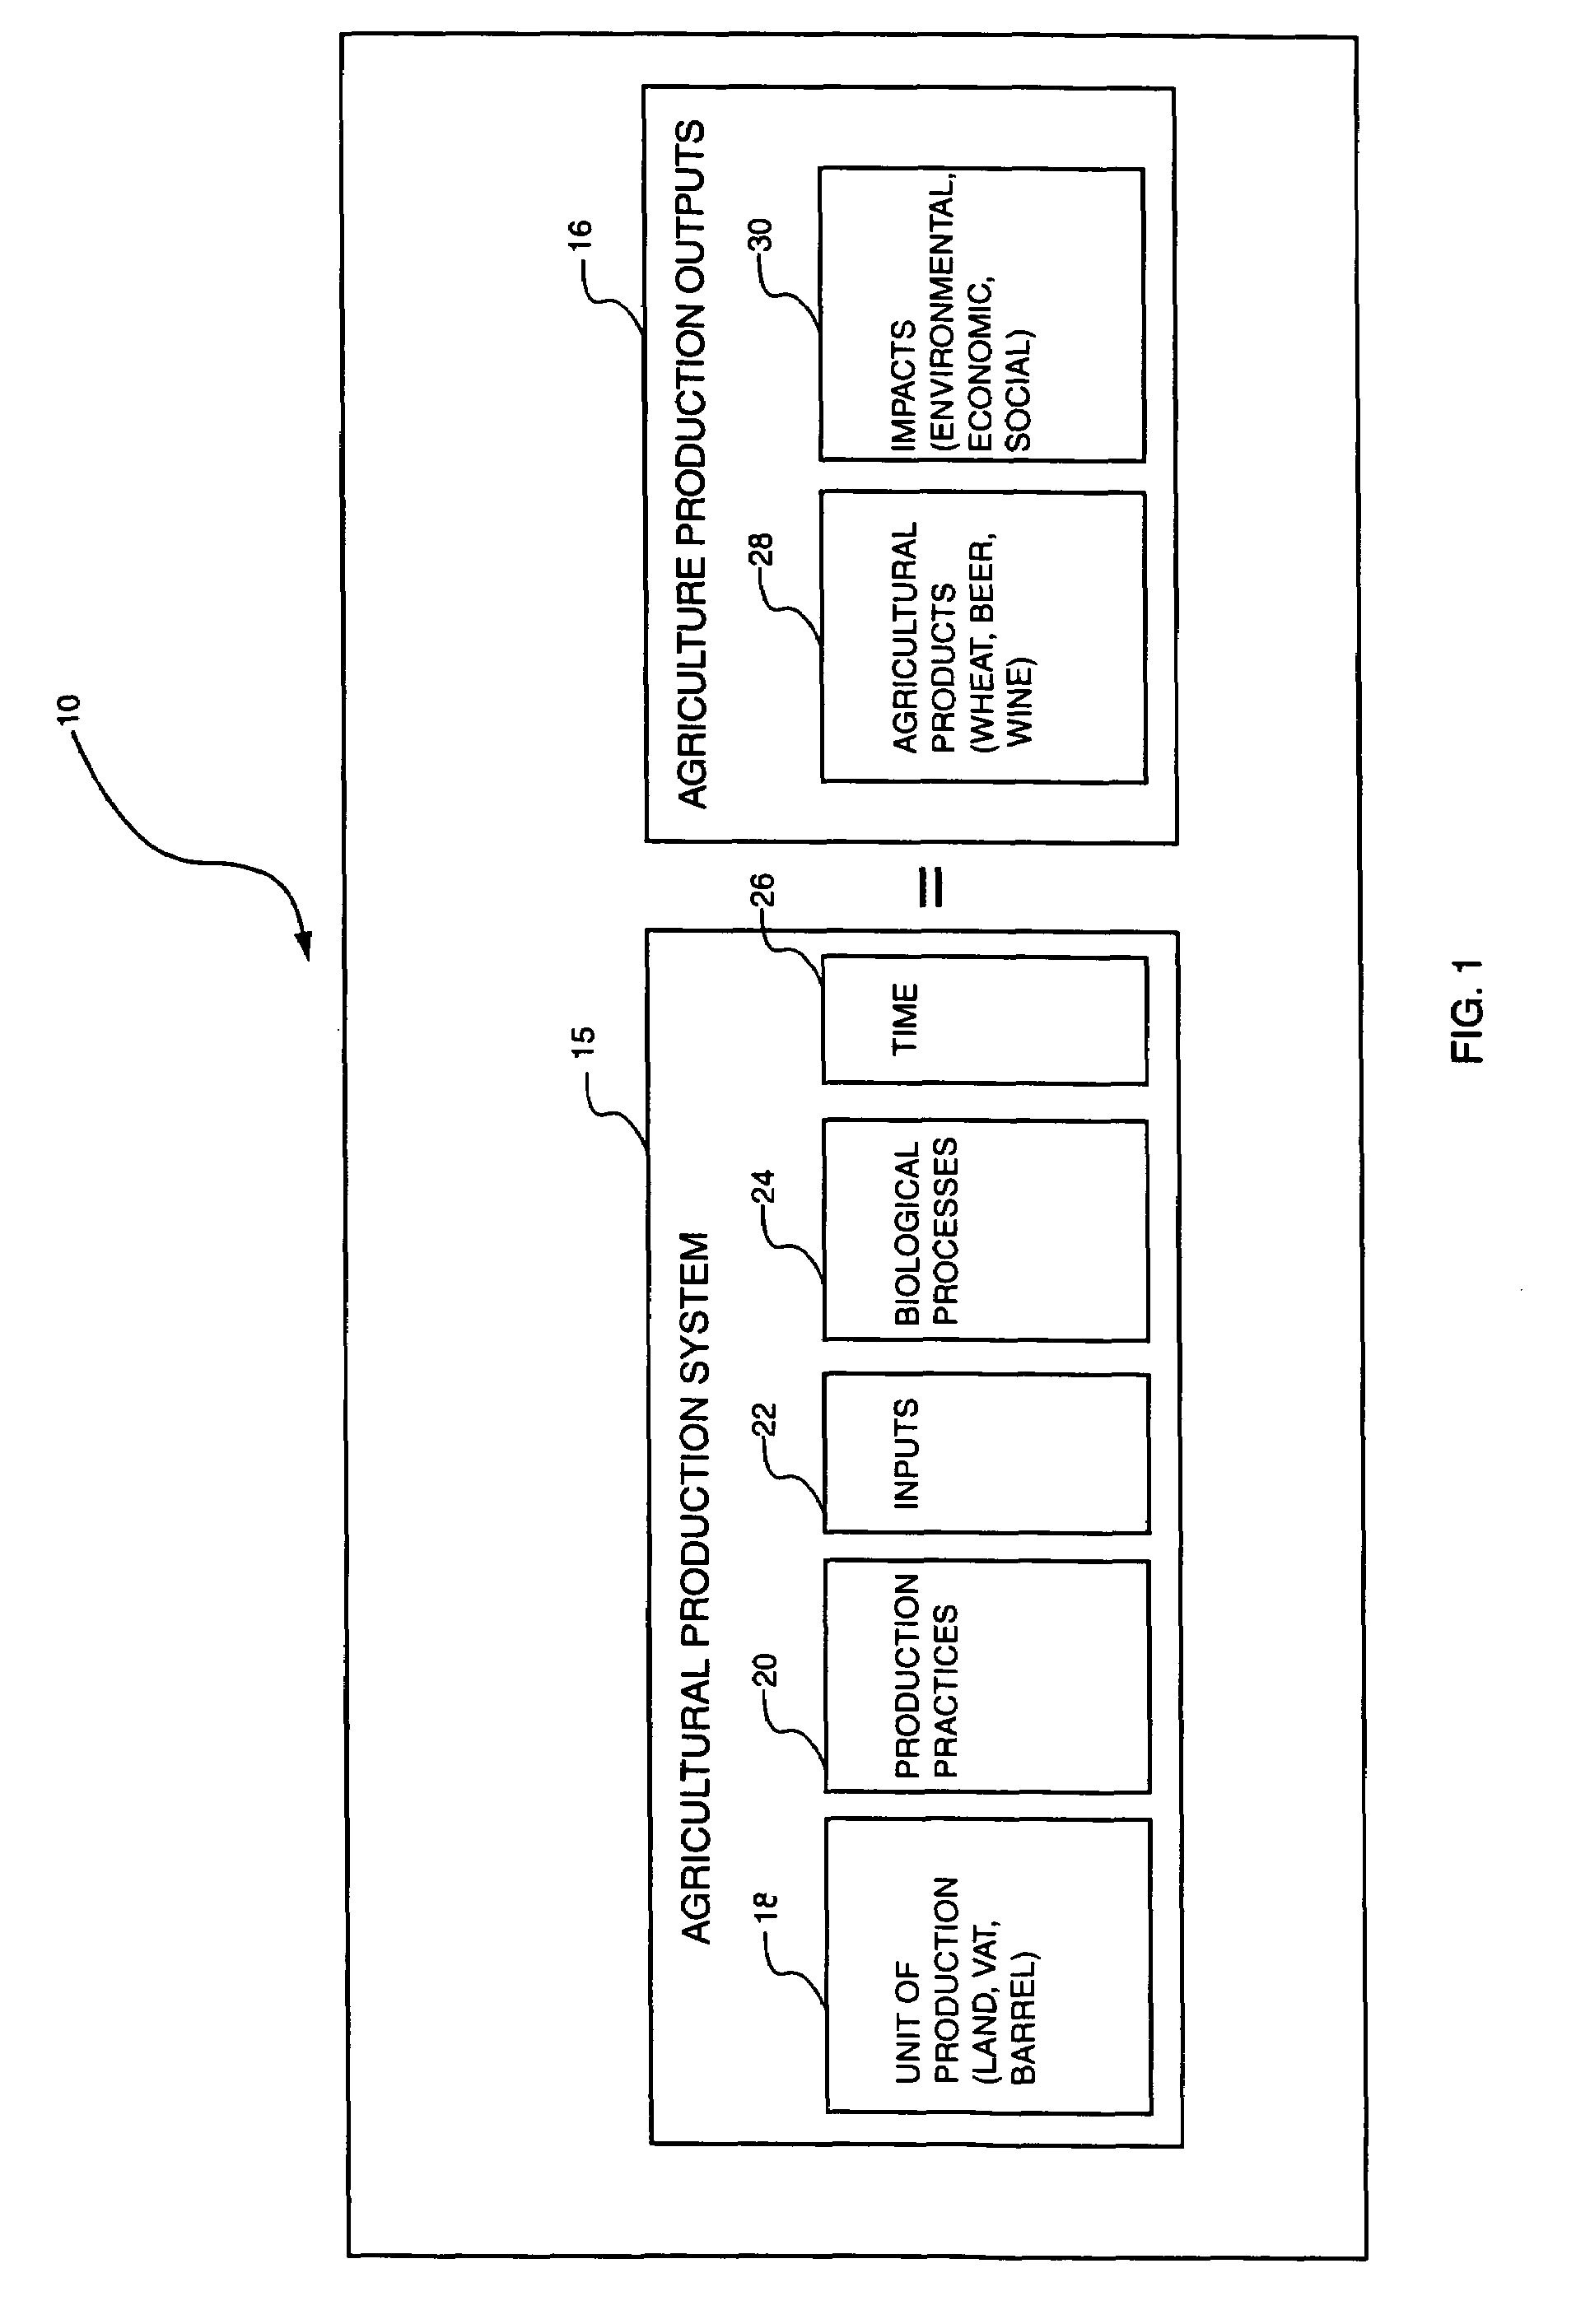 Method and system to communicate agricultural product information to a consumer